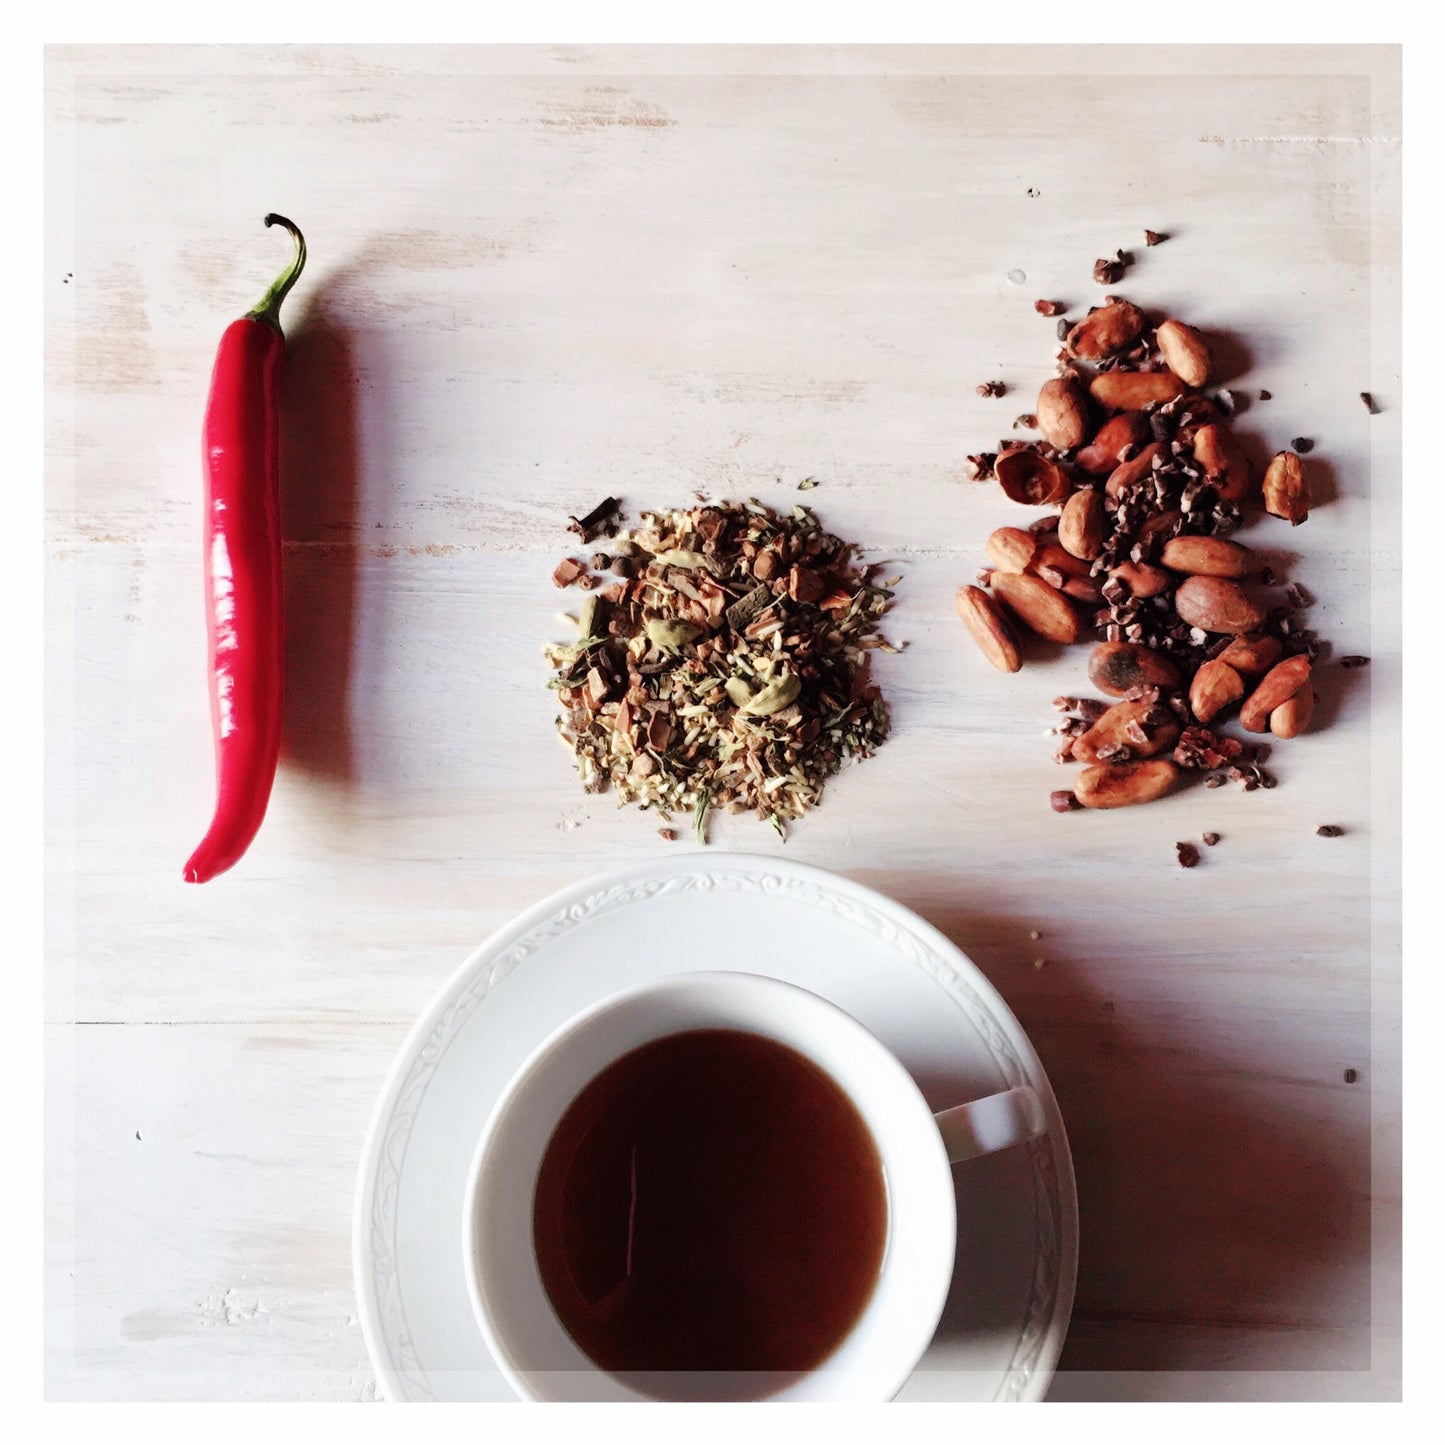 Spiced Tea No.4 - Incan Chocolate 50g BACK MAY 2020 [Cacao Nibs , Sweet Spices & Chilli] - Taste Kaleidoscope